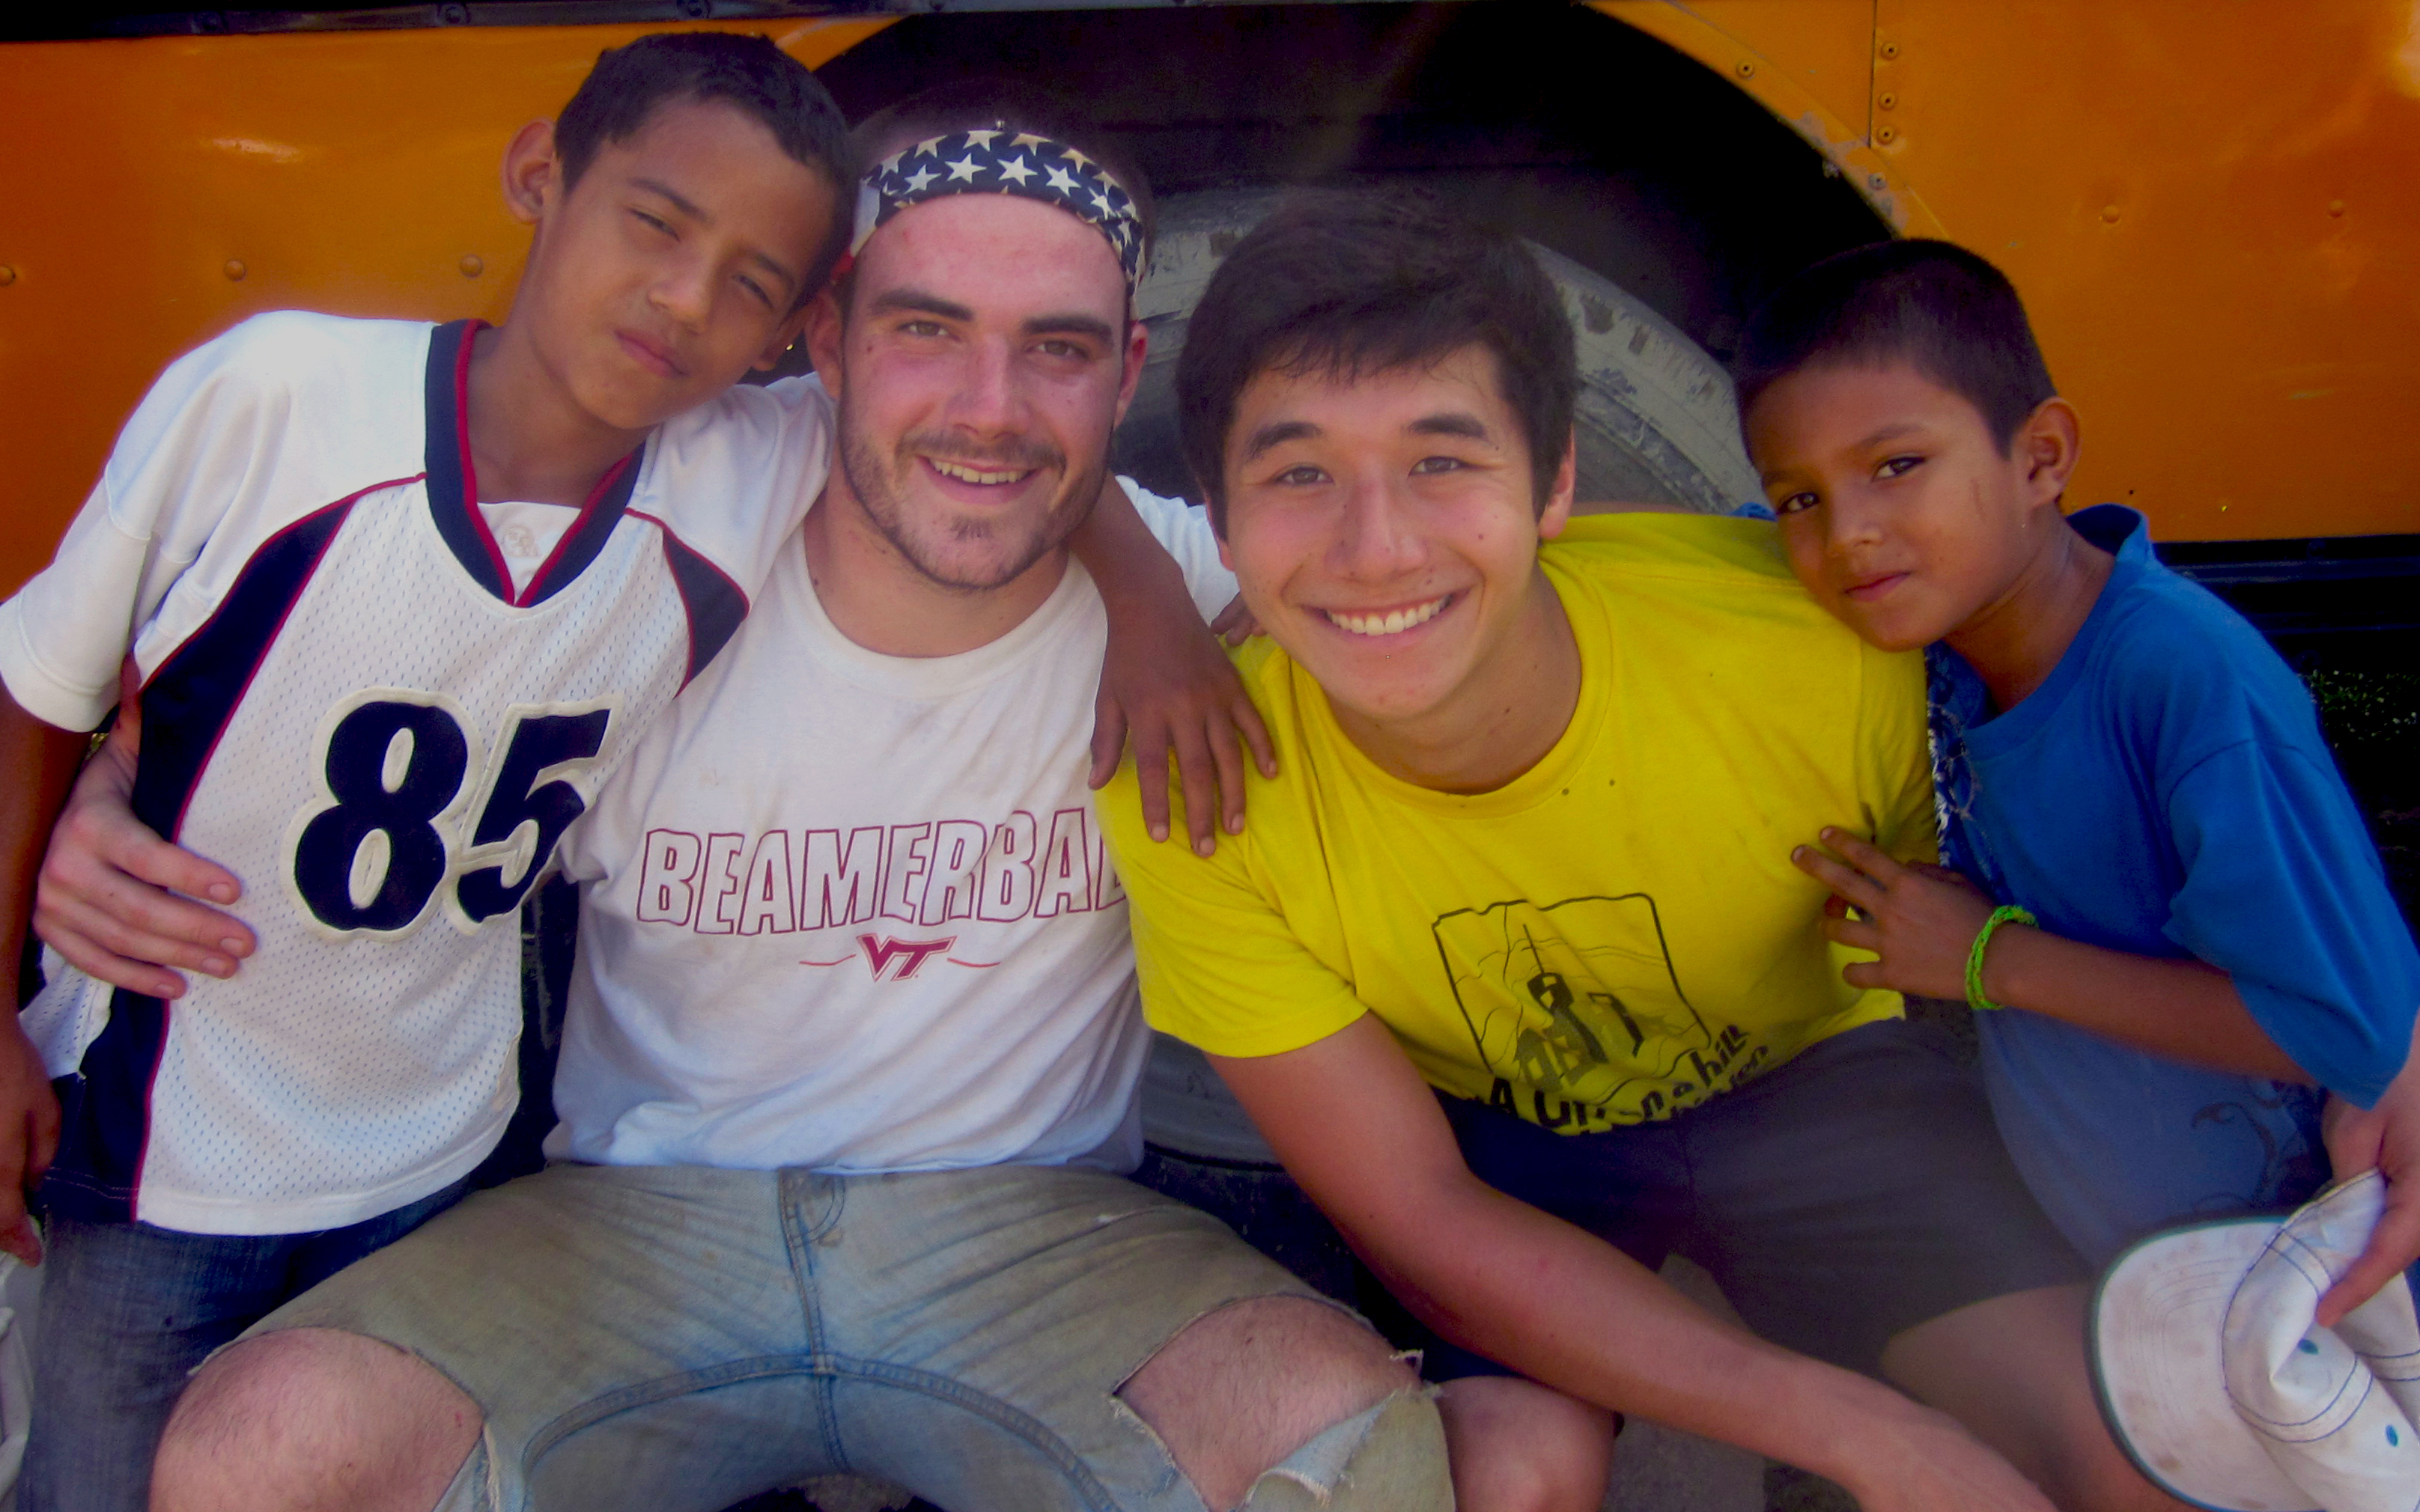 John Duffy (second from left) and Josh Enokida (third from left) pose with two Honduran boys.